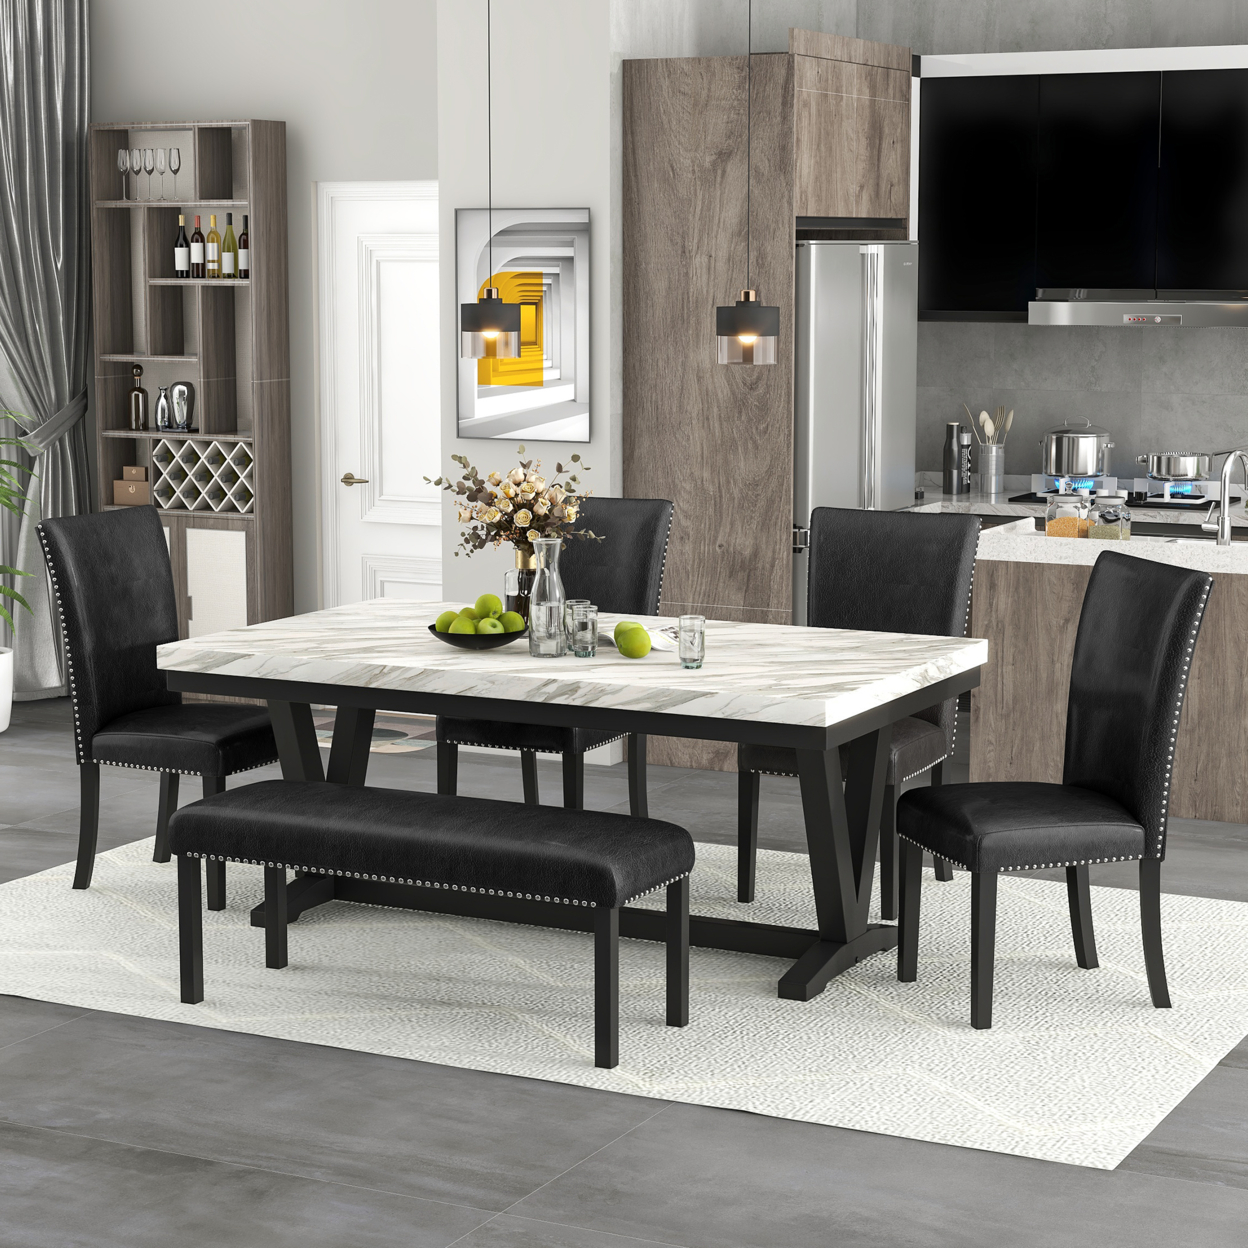 6-piece Dining Table Set with 1 Faux Marble Top Table,4 Upholstered Seats and 1 Bench